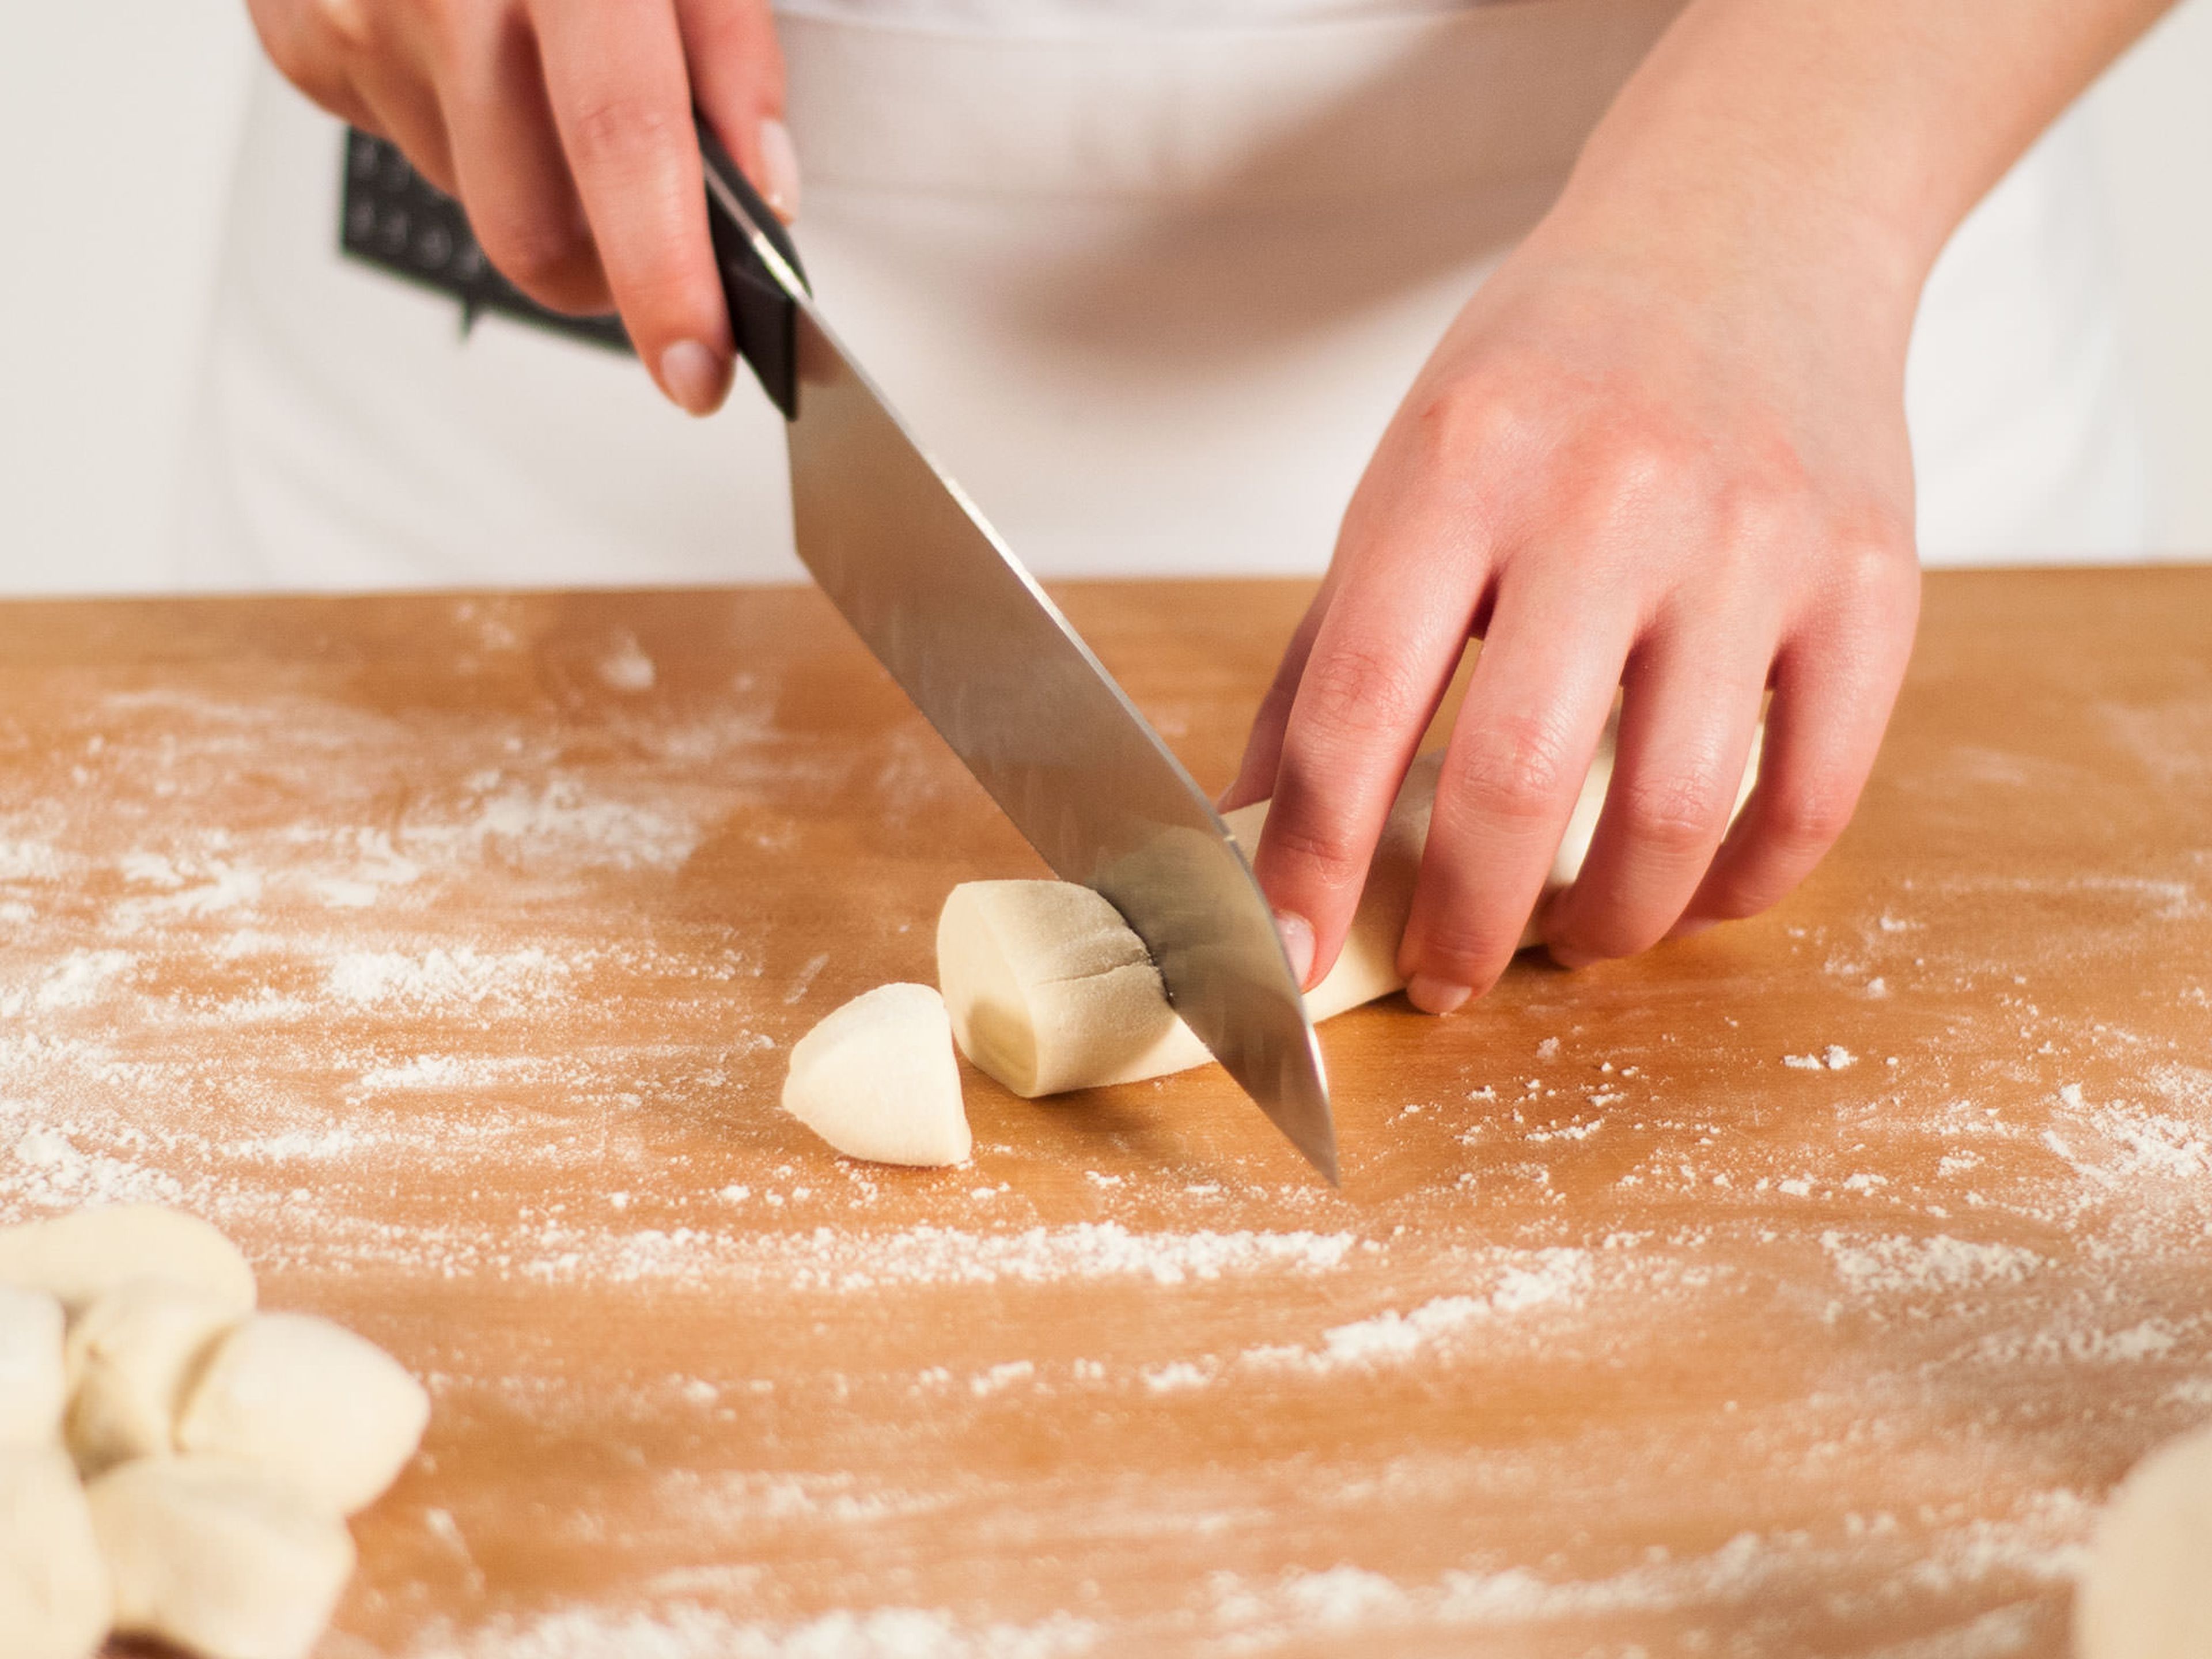 On a lightly floured work surface, knead the dough. Using a sharp knife, separate into 4 equally sized portions. Halve quarters and roll each portion into a small log. Cut each log into 8 walnut-sized pieces.